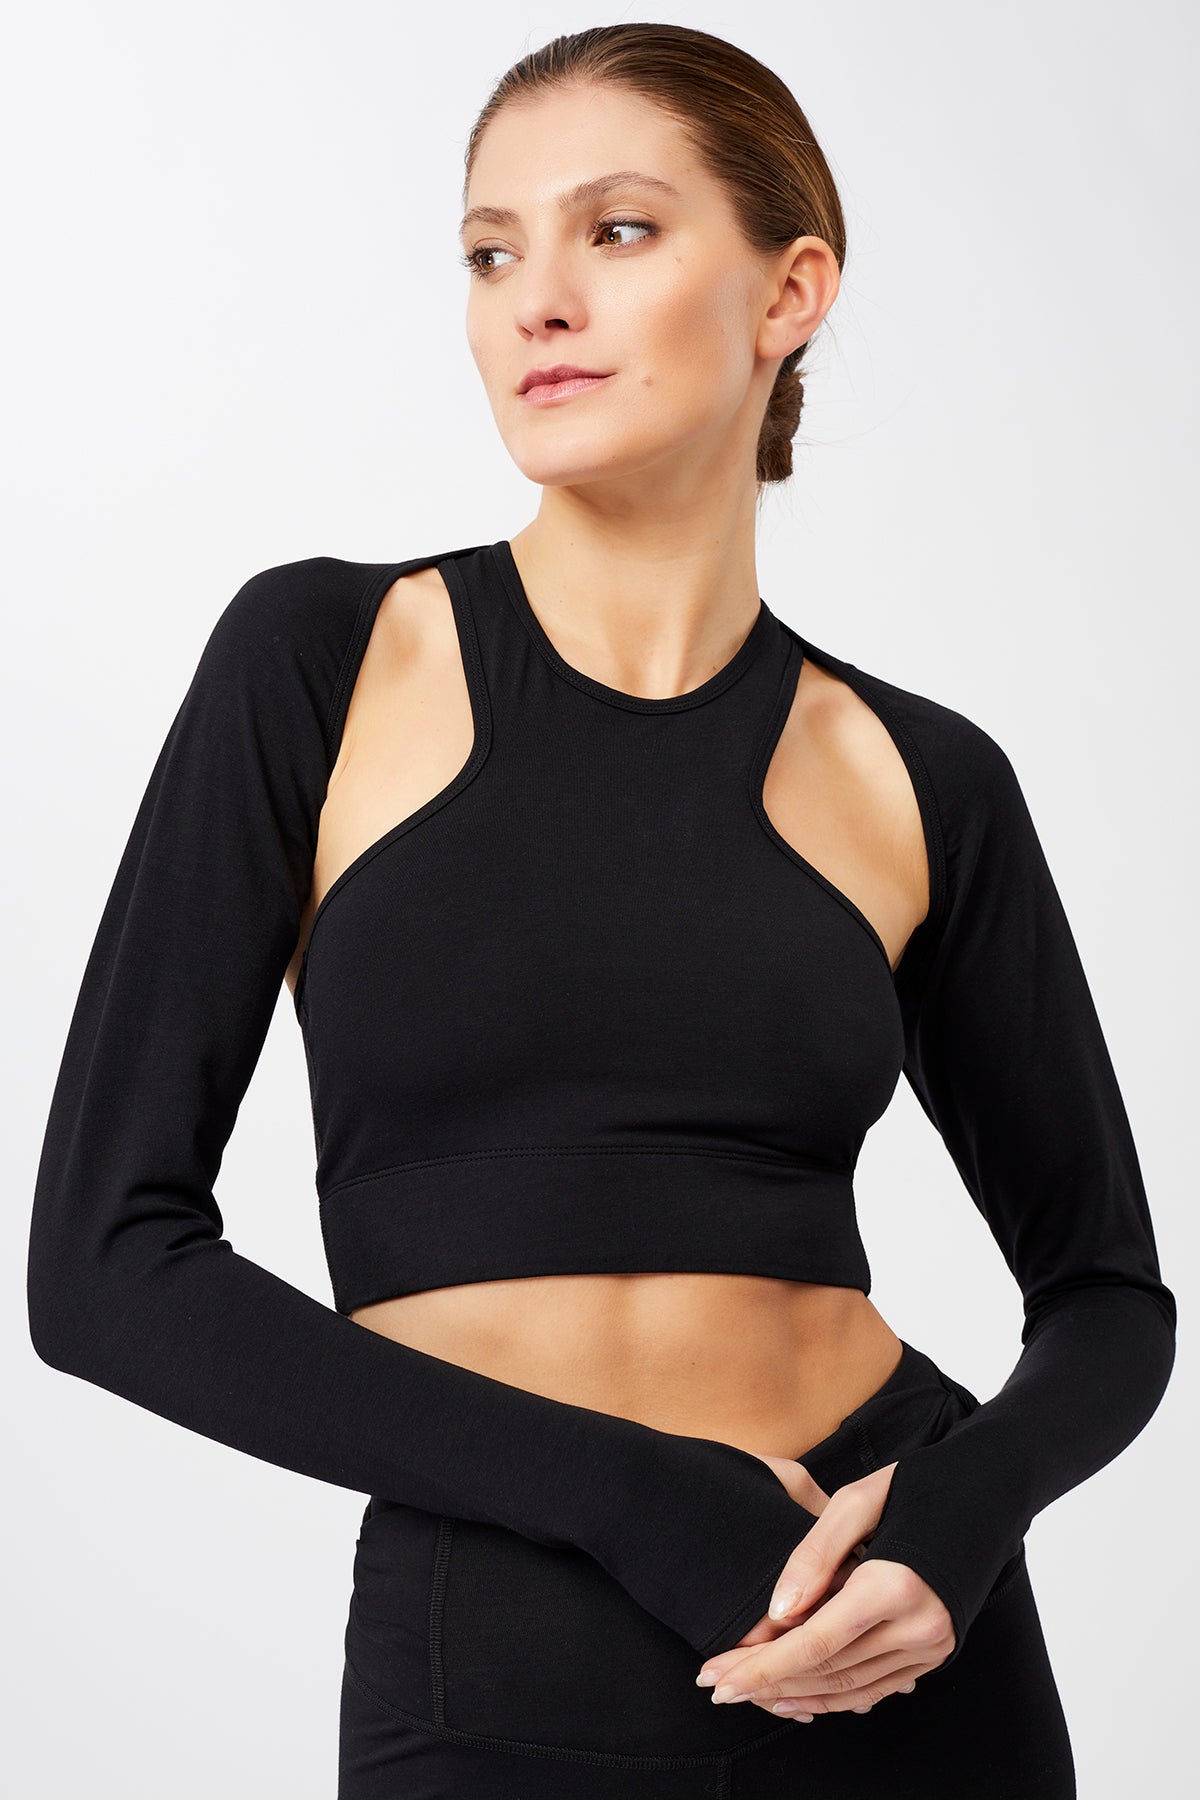 Women's Halter Crop Cutout Yoga Tops Workout T Shirt Long Sleeve Sports Tee  with Bra Pad (Black, S) at  Women's Clothing store